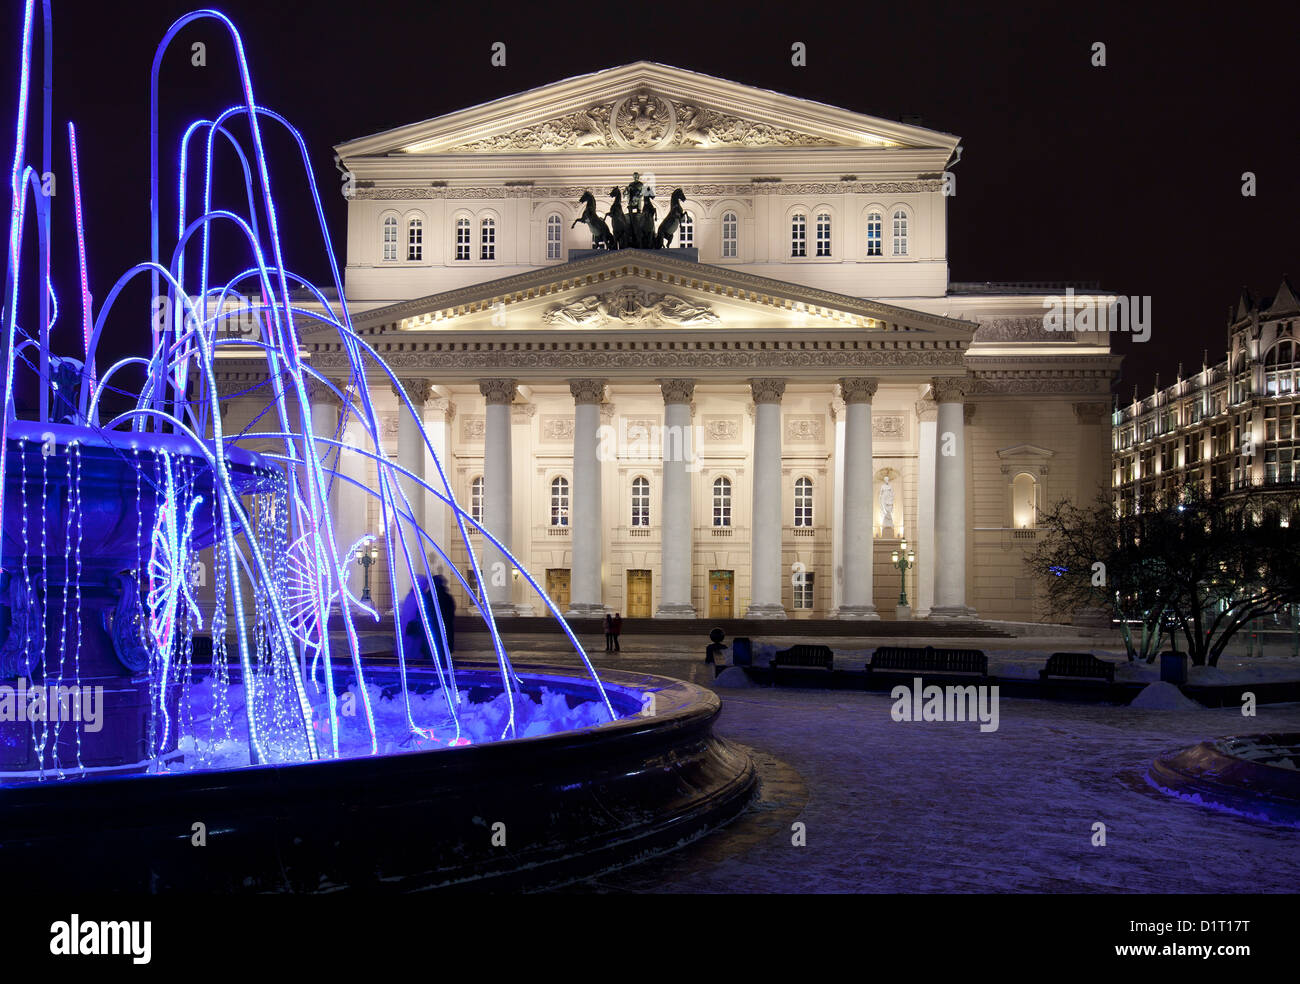 The Bolshoi Theater in Moscow, Russia. Stock Photo